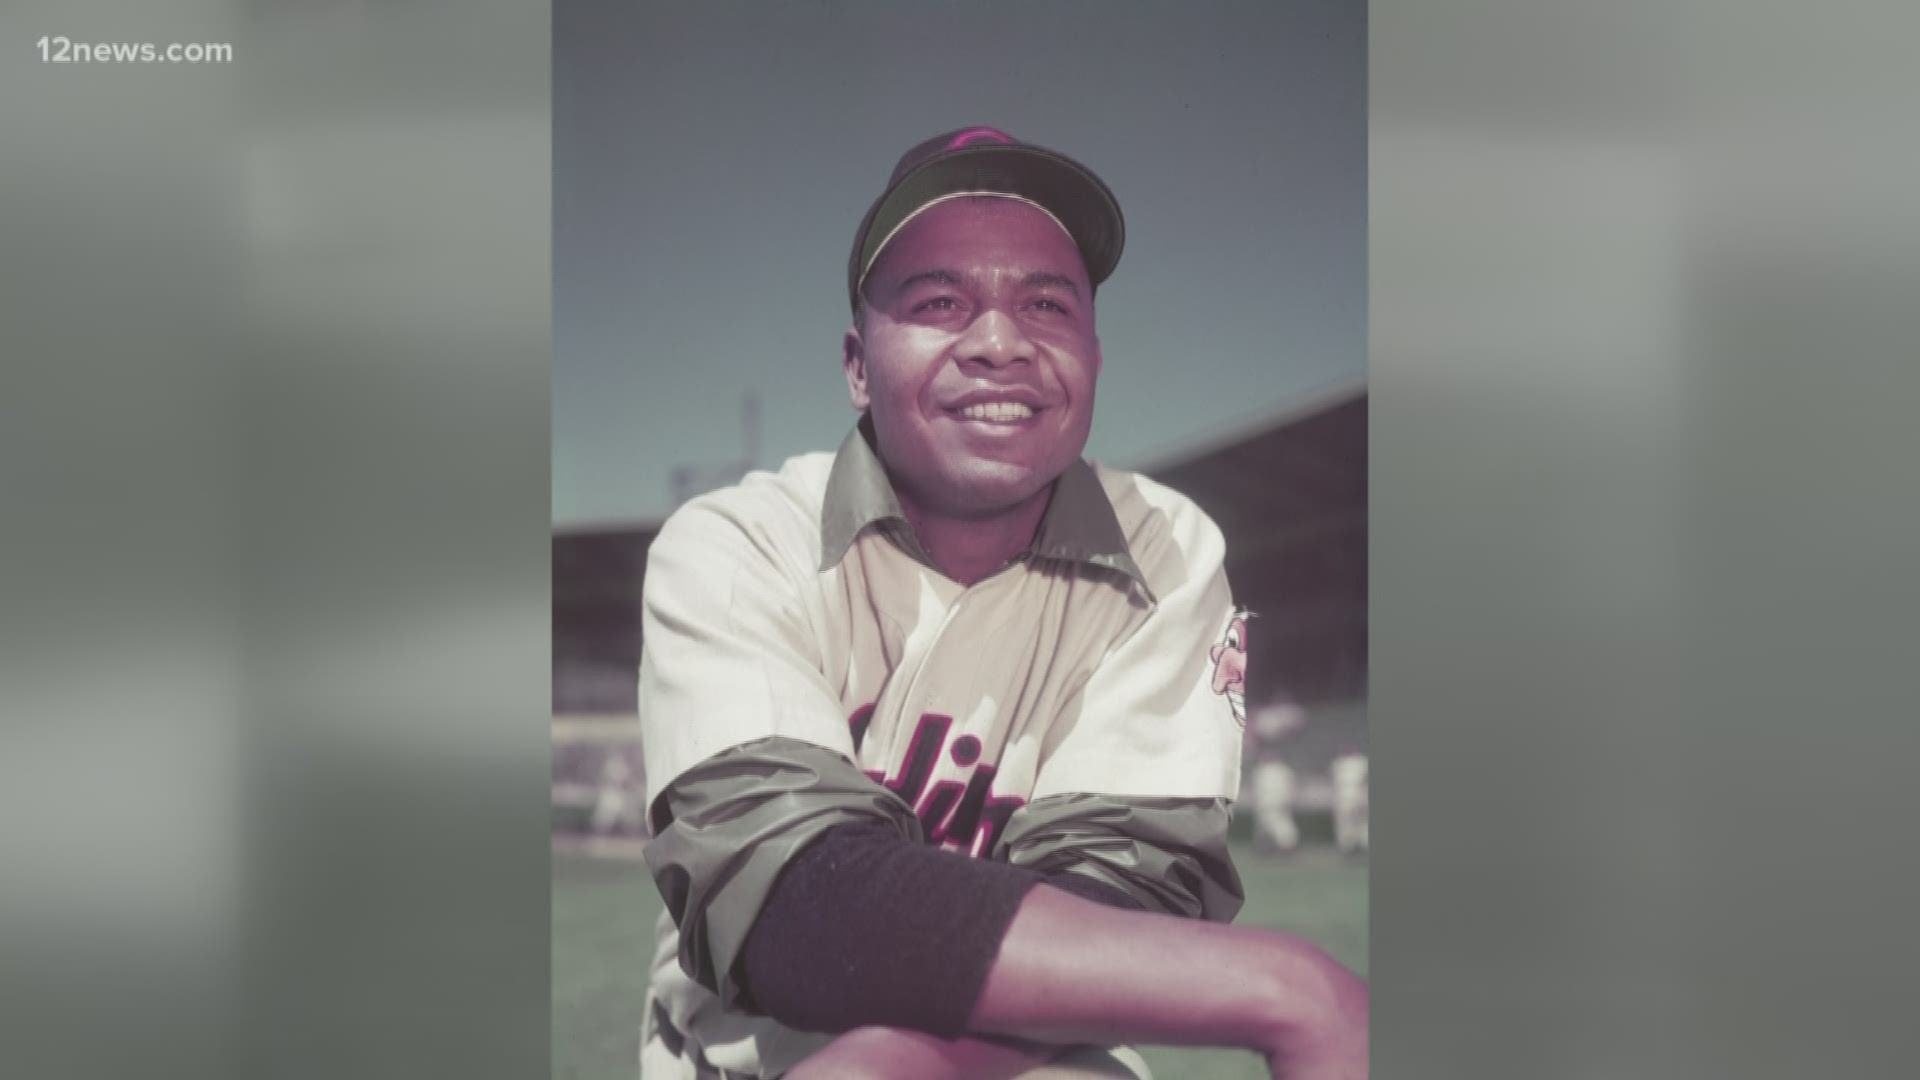 In honor of Black History Month and spring training, we take a look back a some important Cactus League history. Cleveland Indians owner Bill Veeck moved his team's spring training to Tucson in 1946, feeling that his newly integrated team would be more racially accepted in Arizona than in Florida. The move inspired other teams to also move to Arizona.